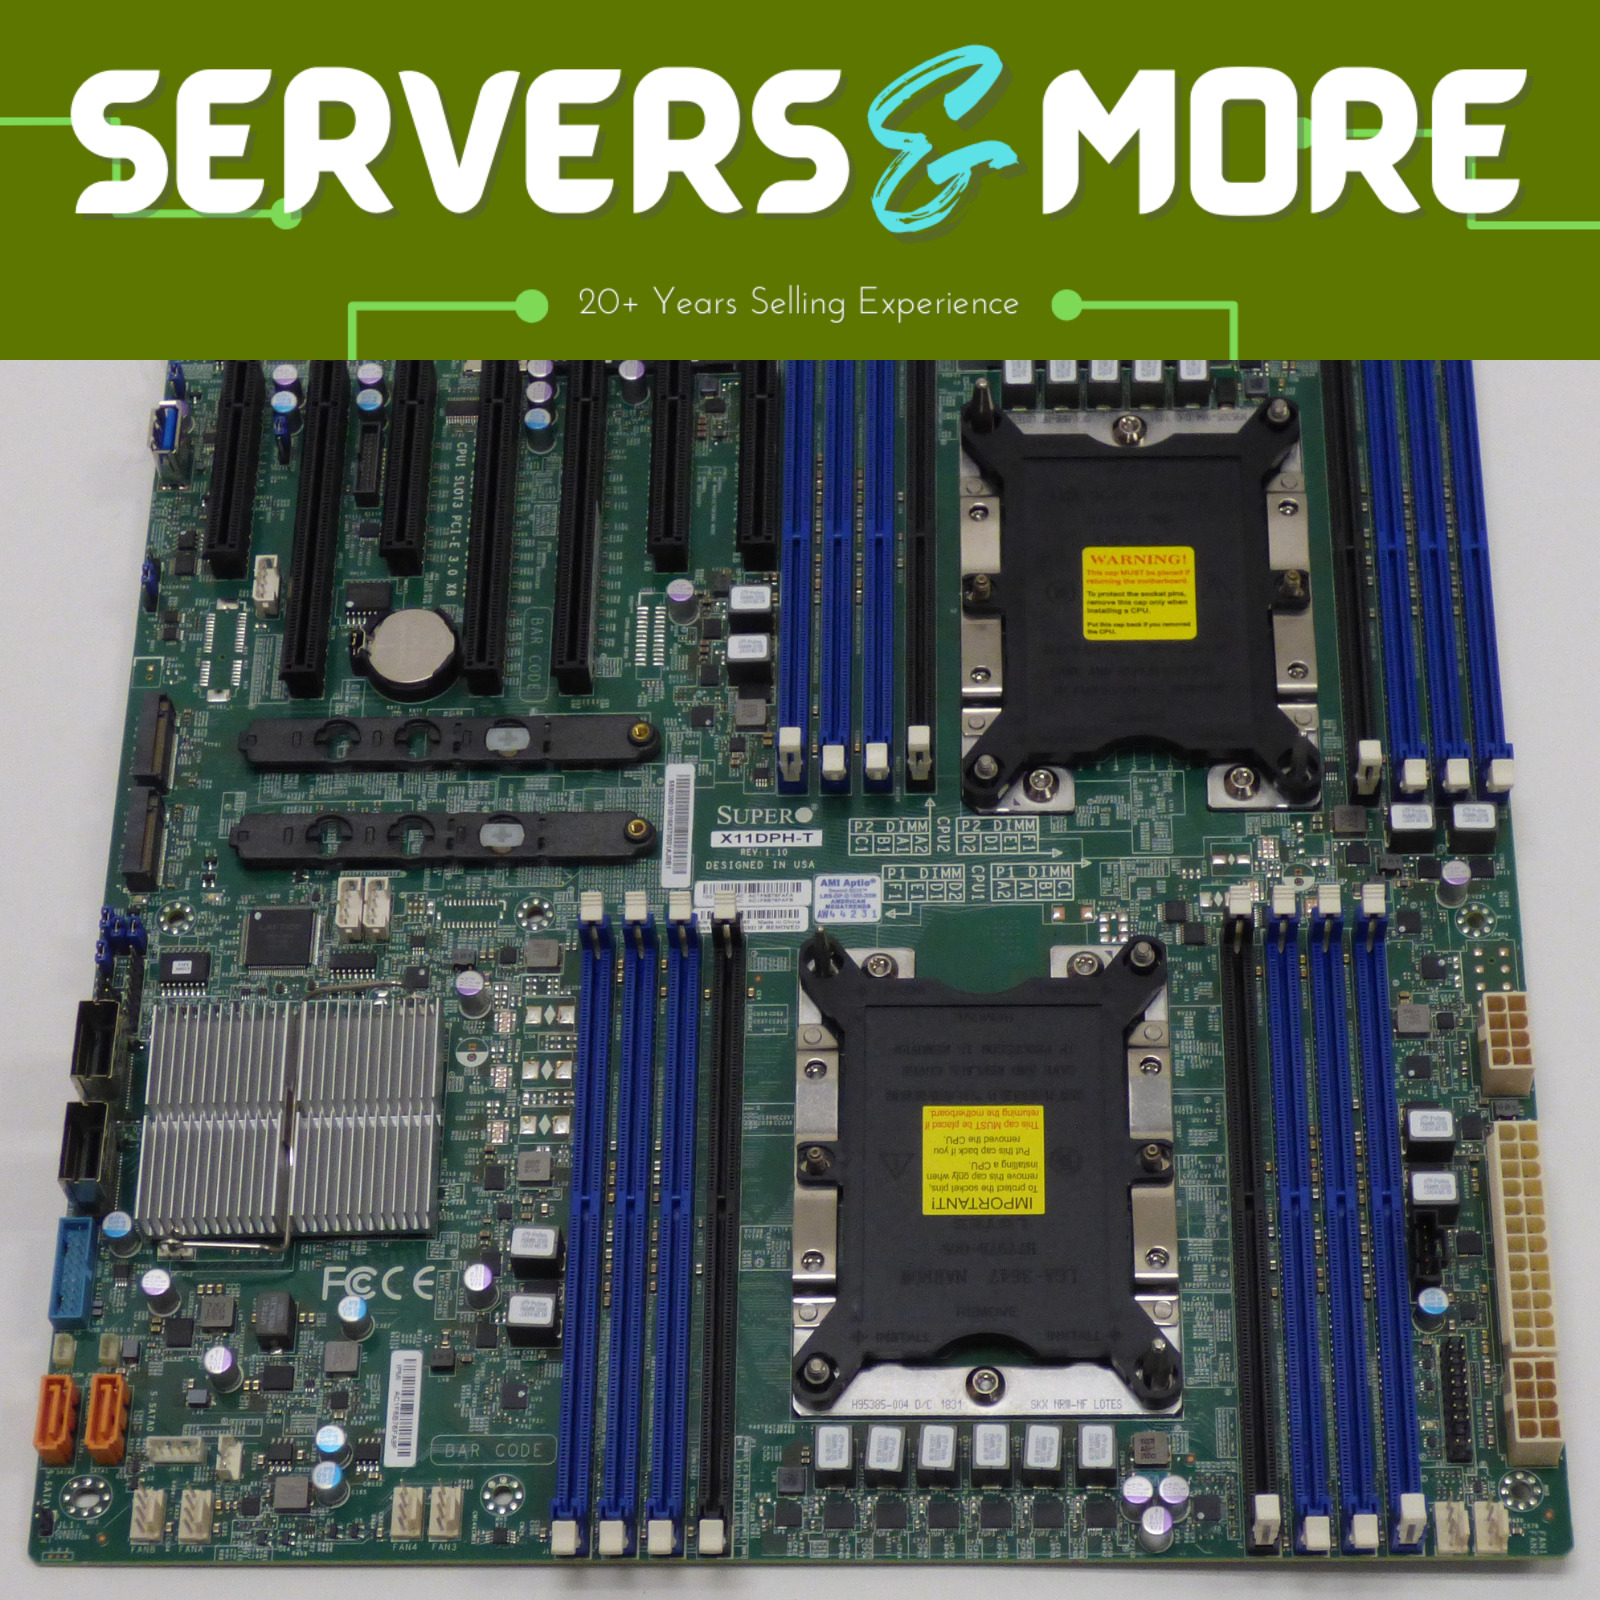 LOT 10x Supermicro X11DPH-T Motherboard LGA3647 2nd Gen Xeon Scalable Processors